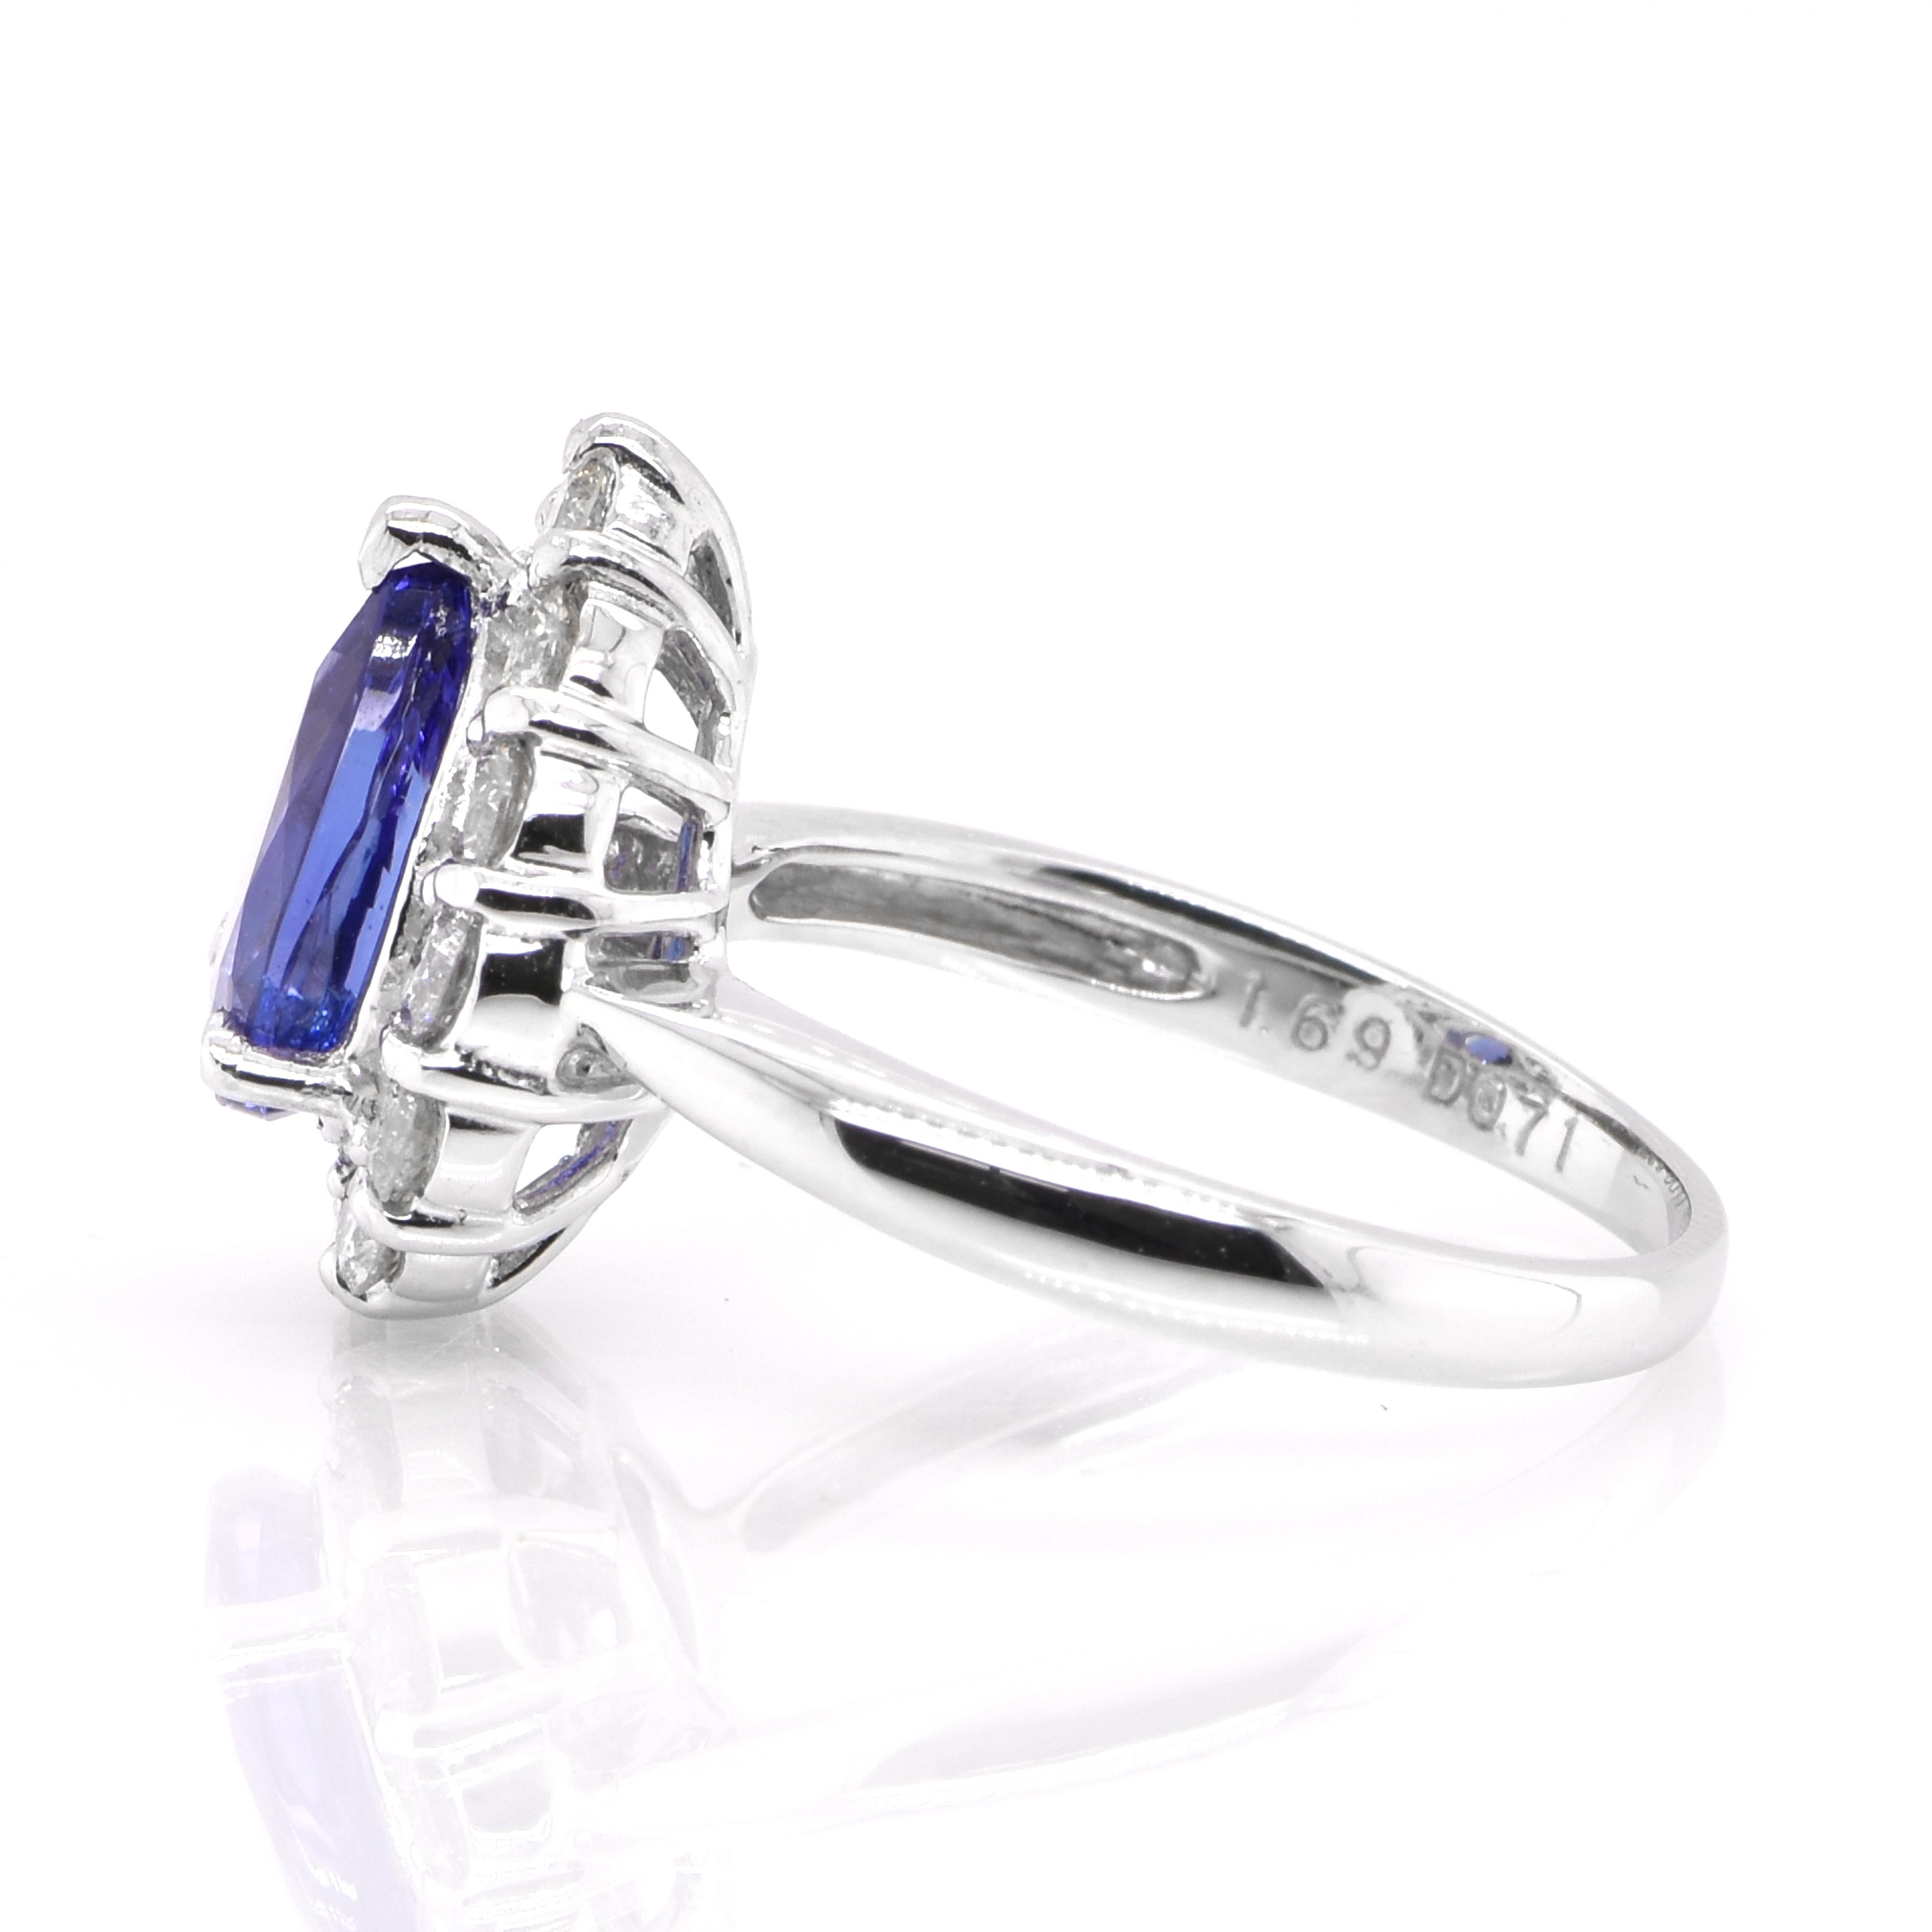 1.69 Carat Natural Pear Cut AAA+ Tanzanite and Diamond Ring Set in Platinum In New Condition For Sale In Tokyo, JP